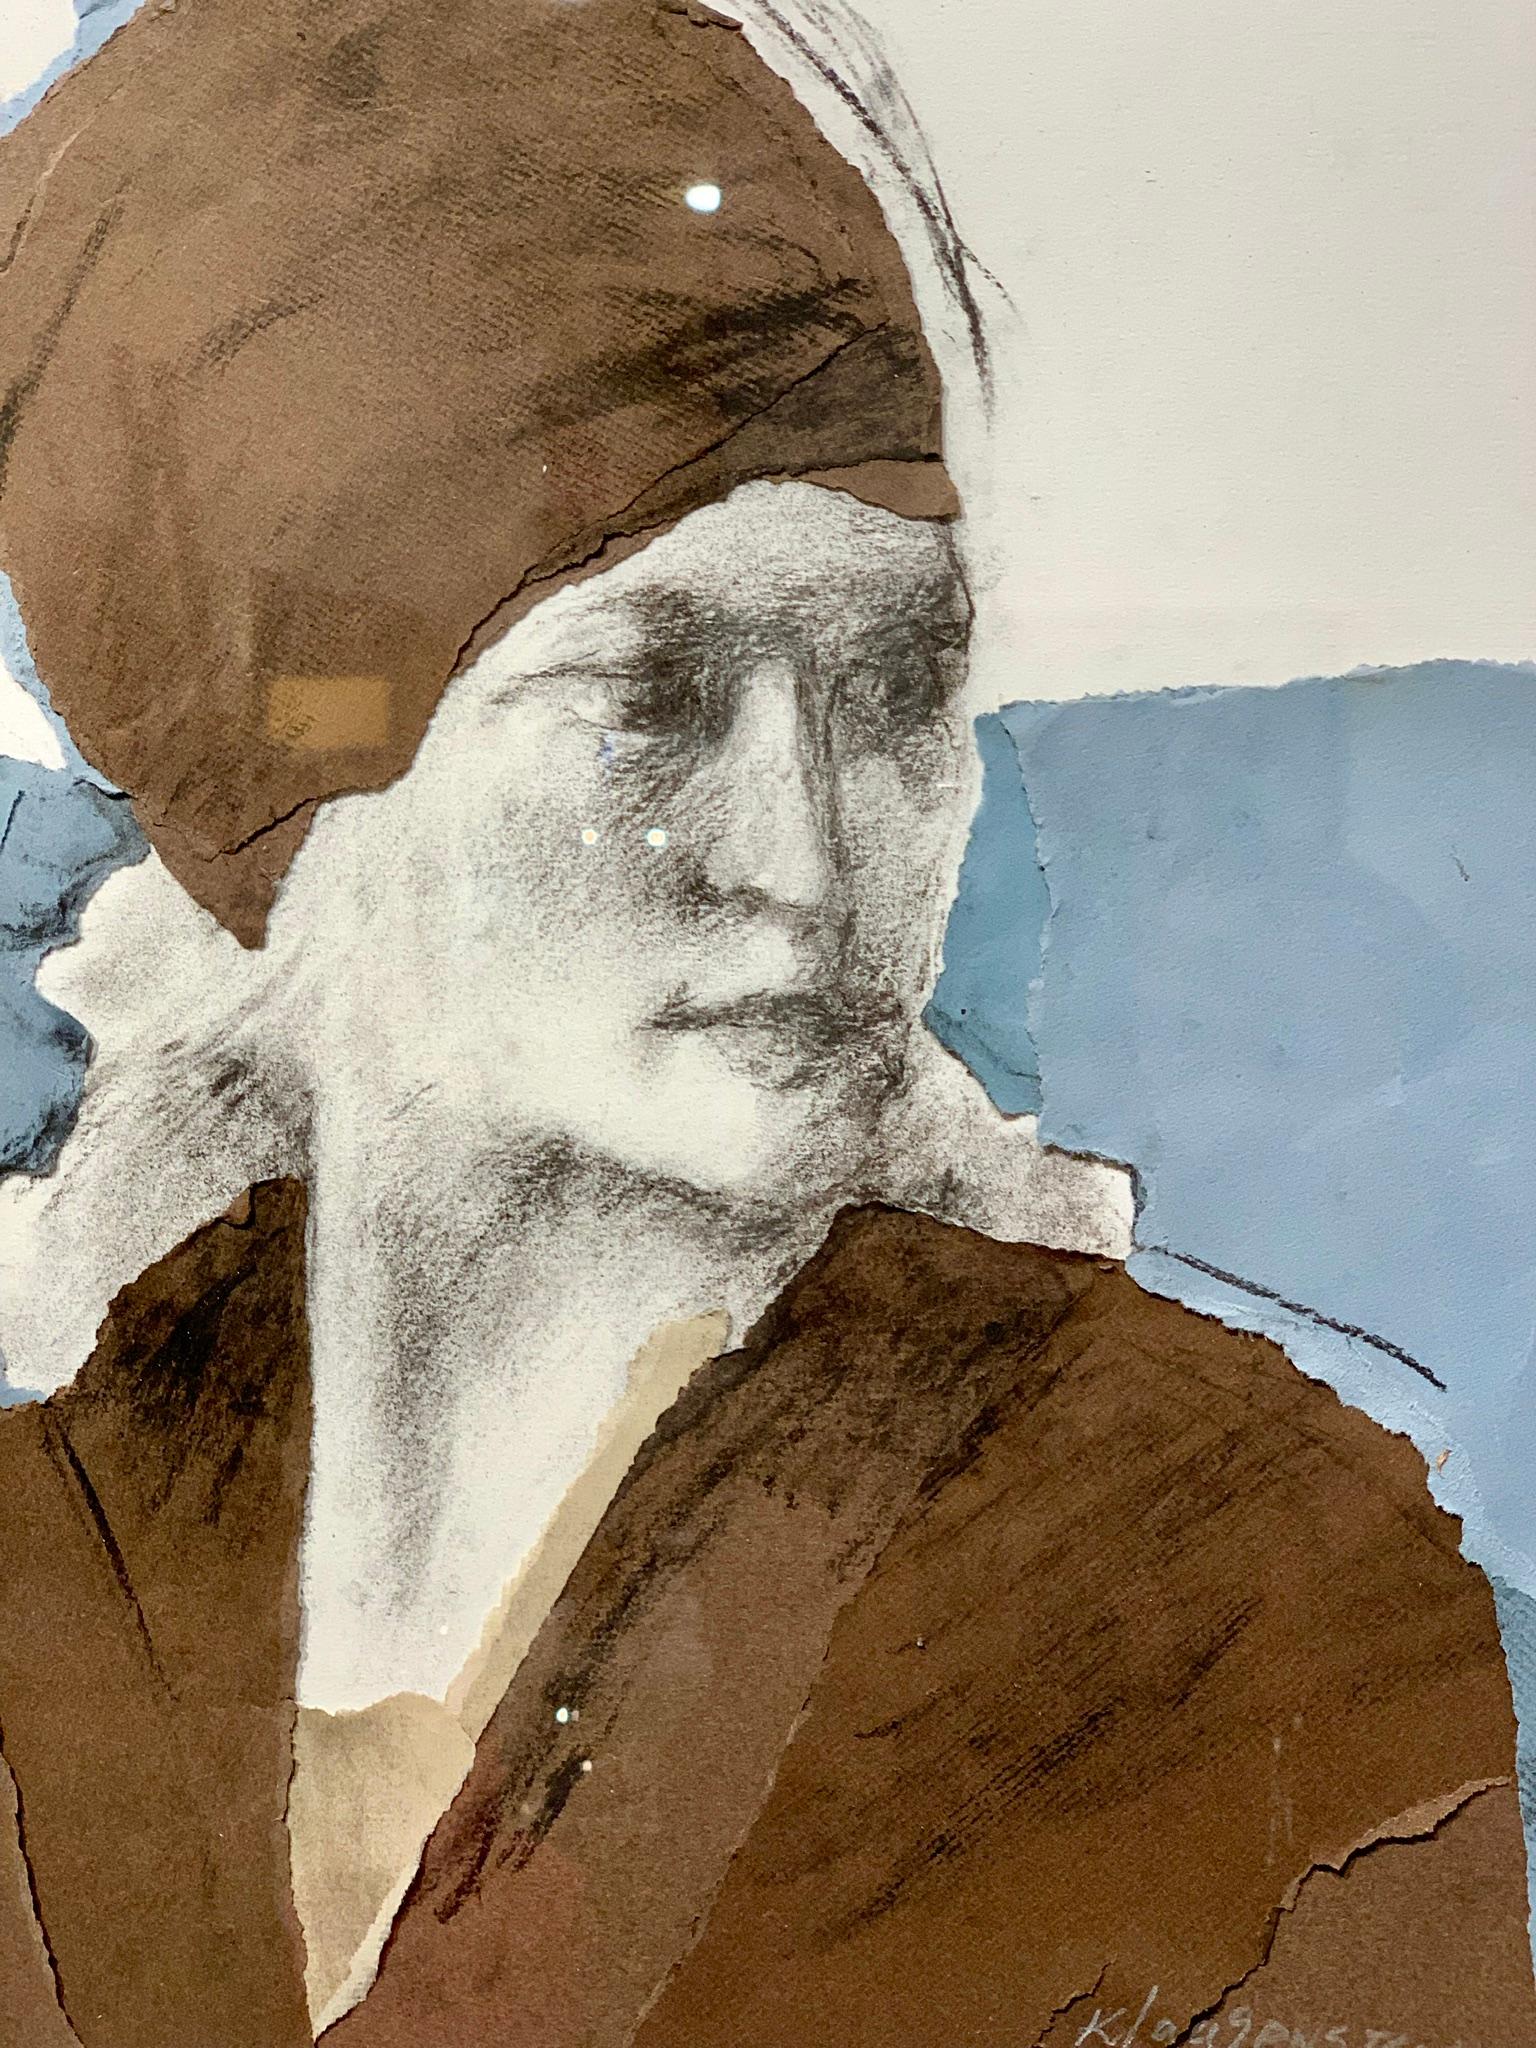 Charcoal collage portrait by Judith klausenstock. Klausenstock has a B.A. in fine art from Hardvard University. 

Collage #95 is dark brown and blue-gray on off white background. Signed at bottom right. 

Measures: D 1:14” x H 24” x W 20.25”